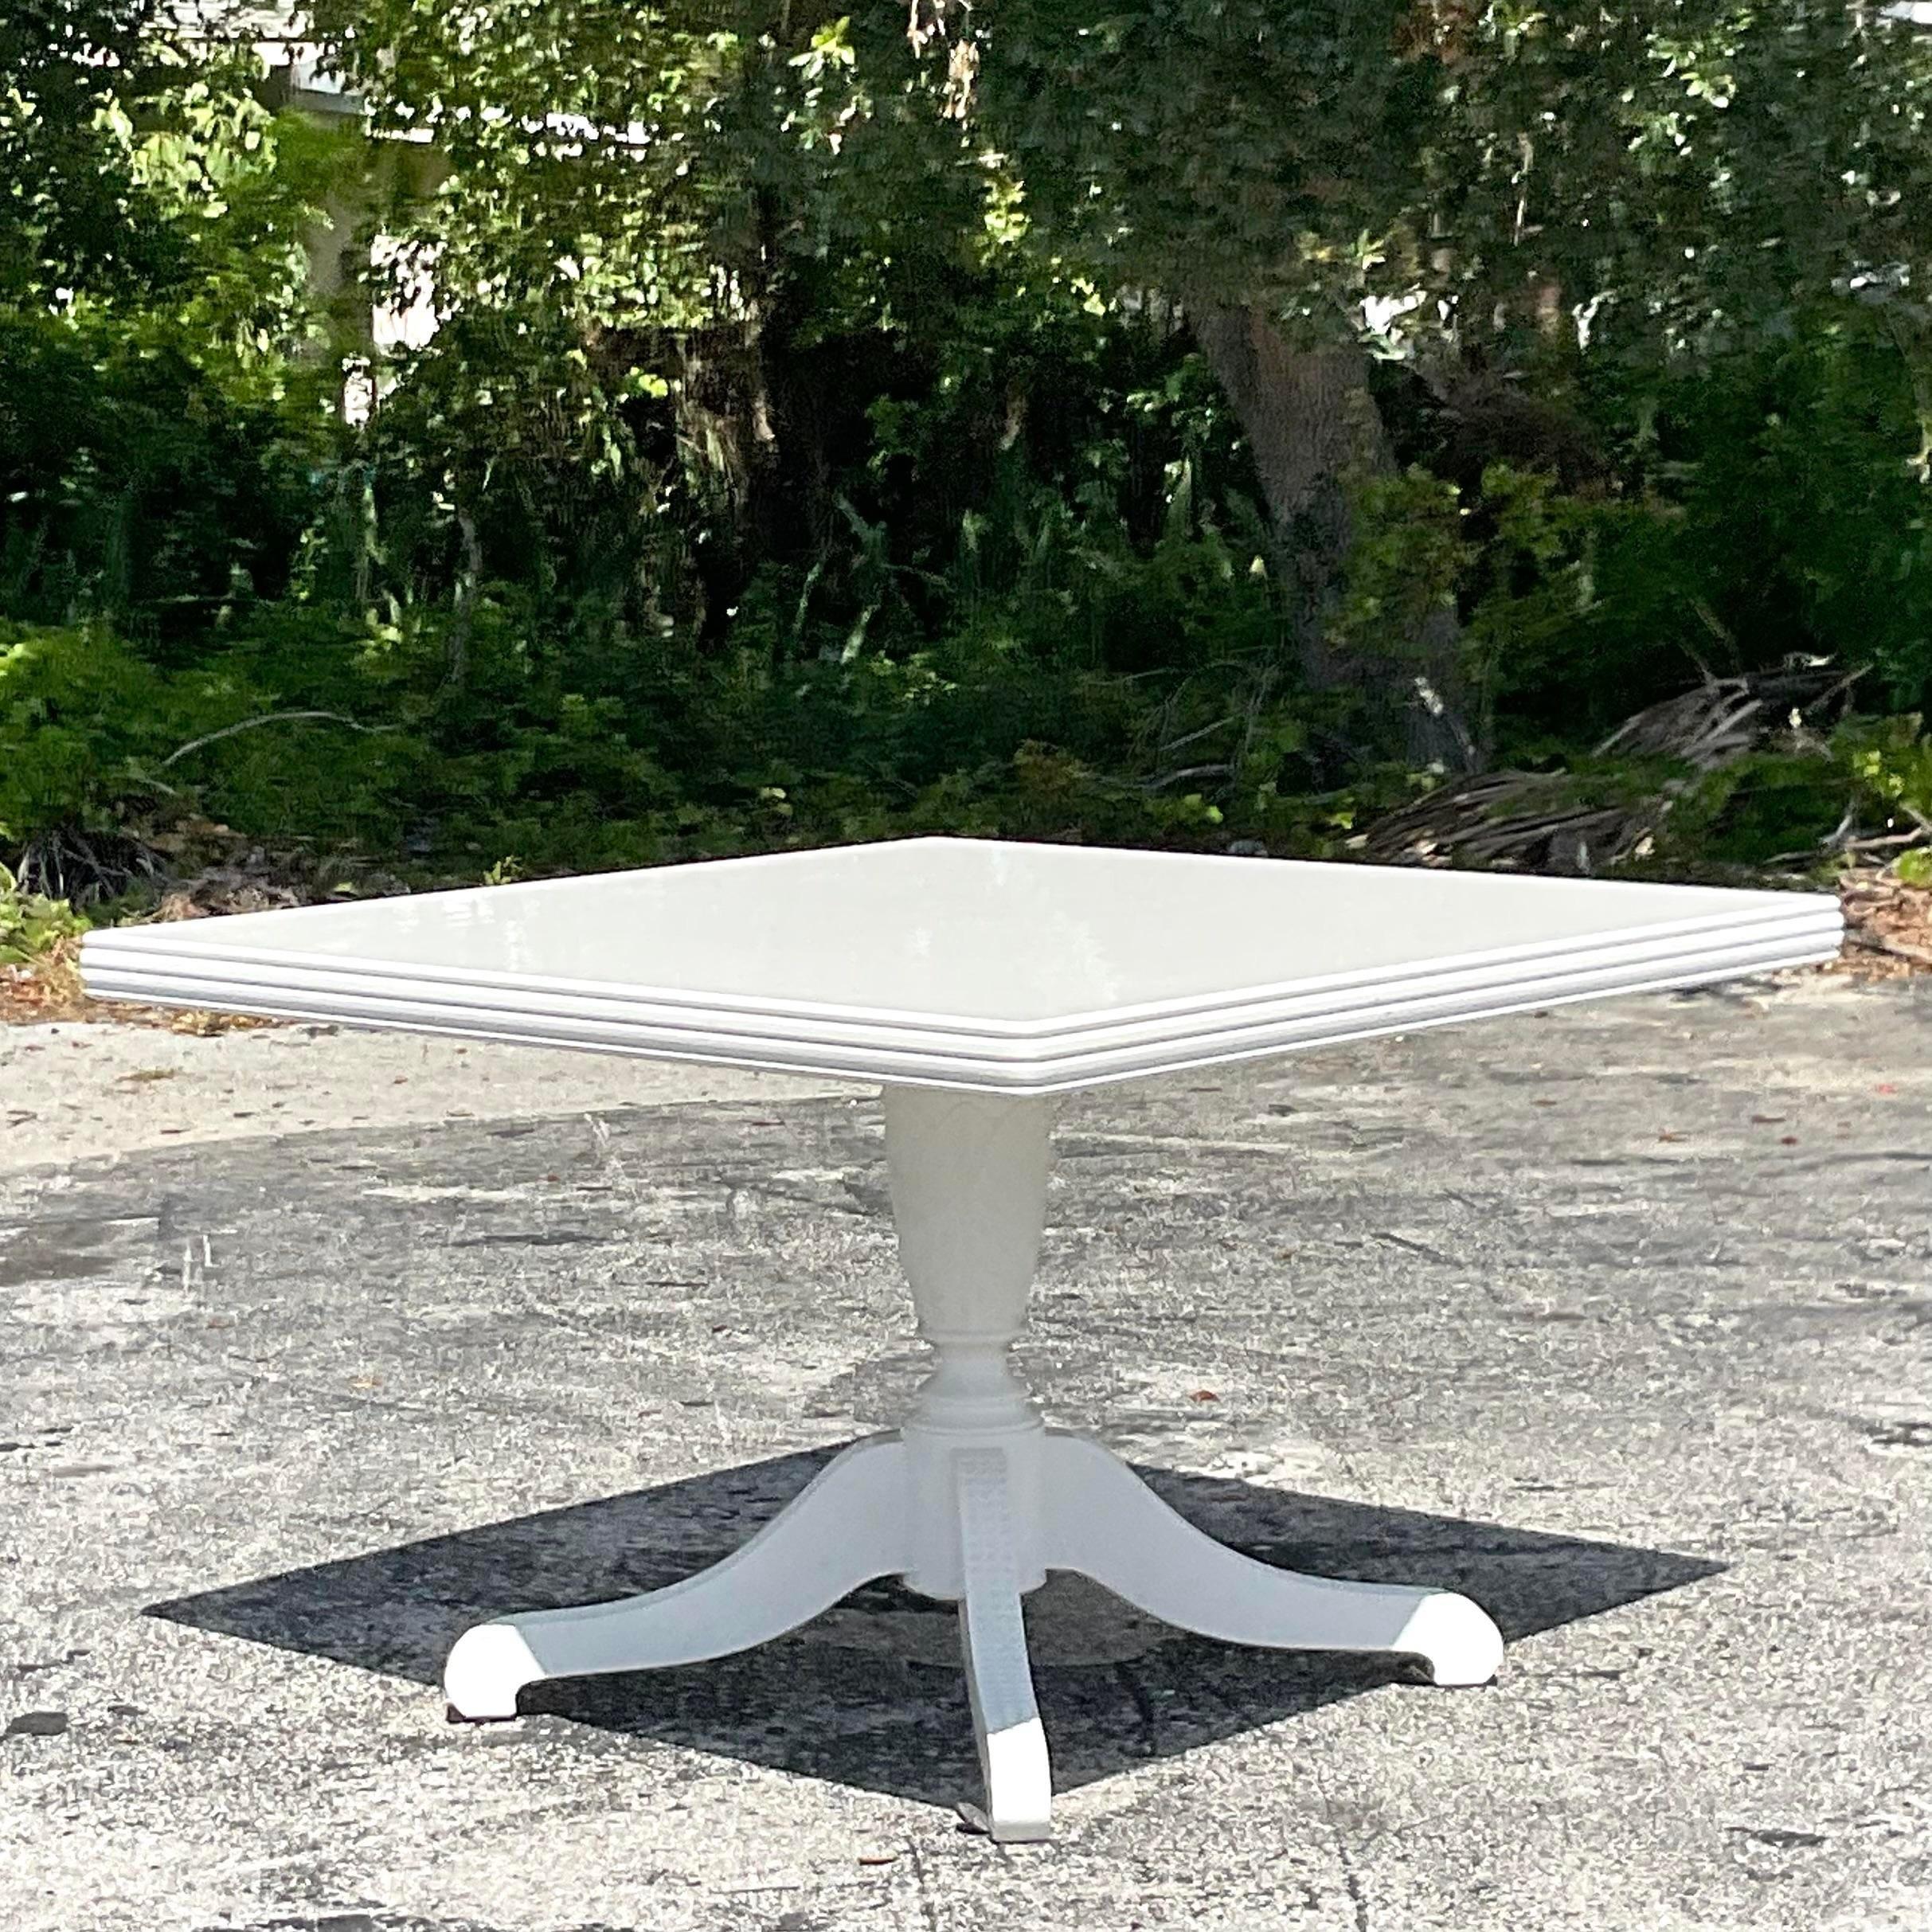 A fantastic vintage Regency dining table. A fabulous Duncan Phyfe design in a white lacquered finish. Hand carved detail on the legs. Acquired from a Palm Beach estate.